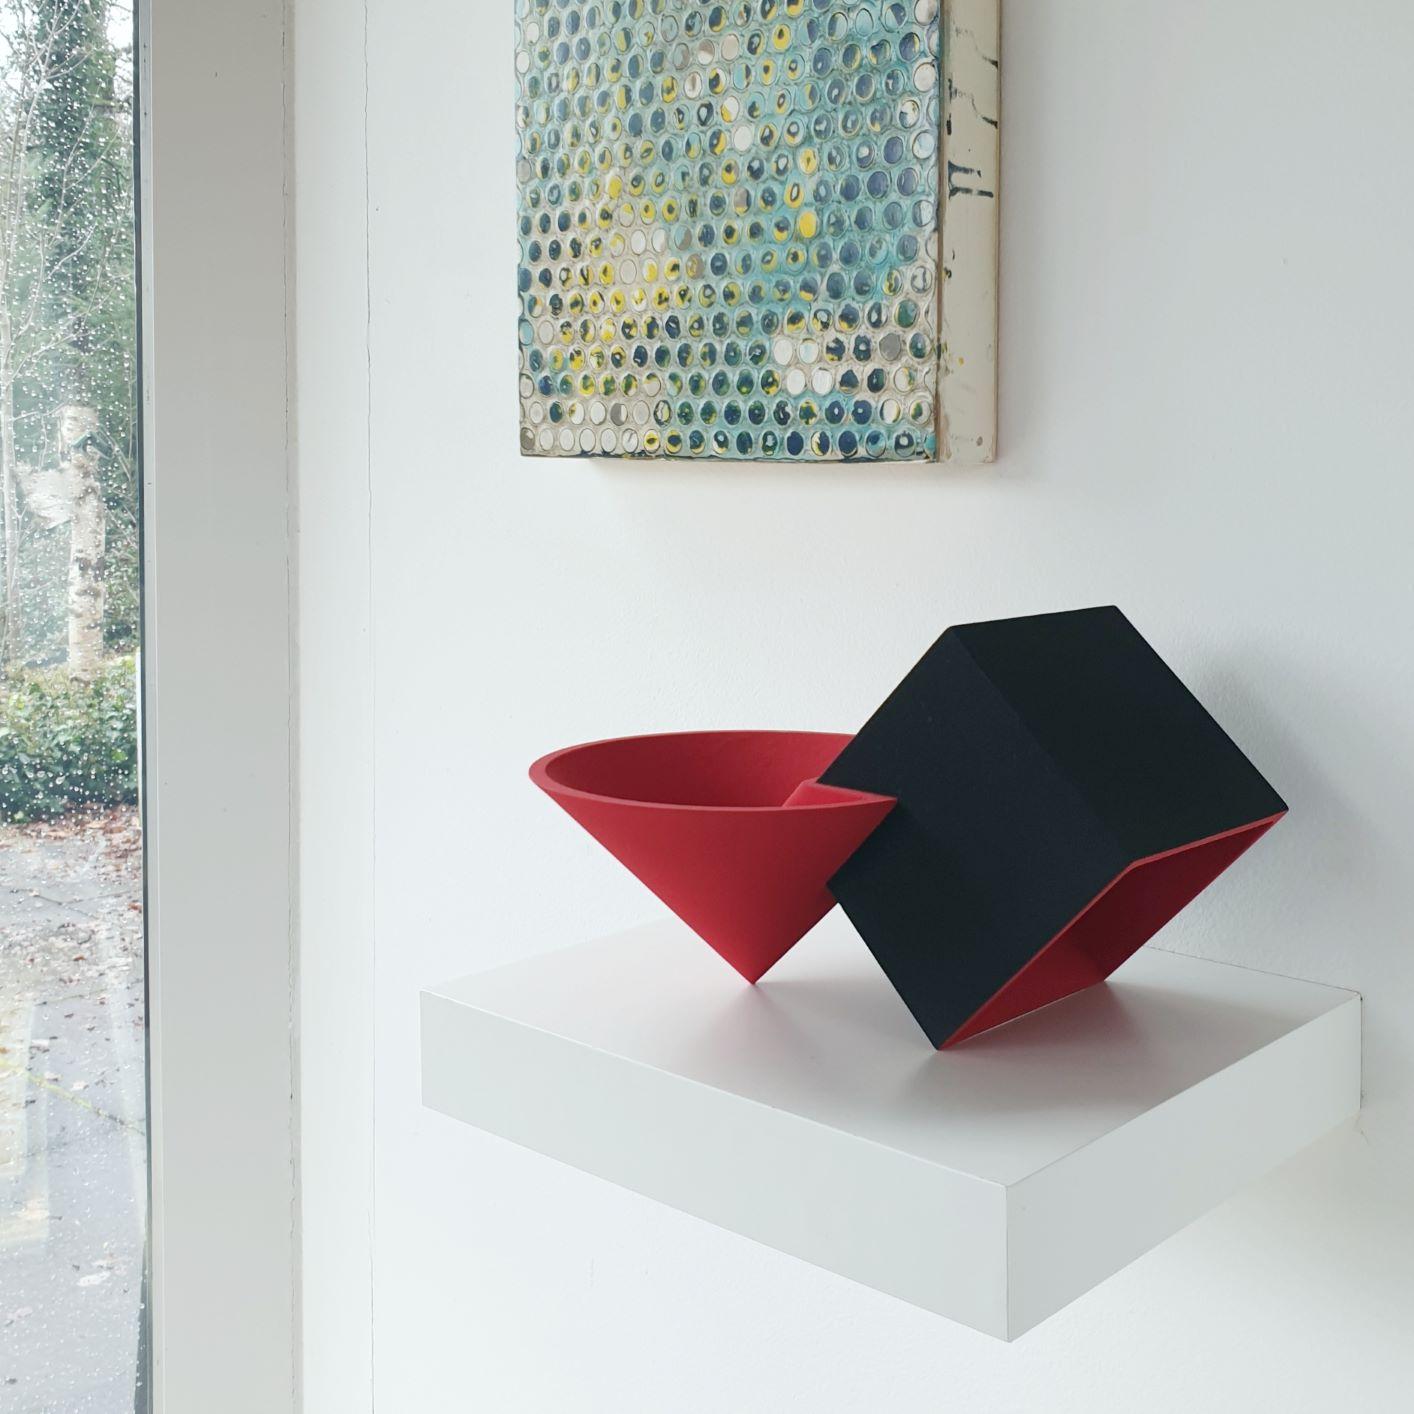 SC1601 red - contemporary modern abstract geometric ceramic object sculpture - Sculpture by Let de Kok